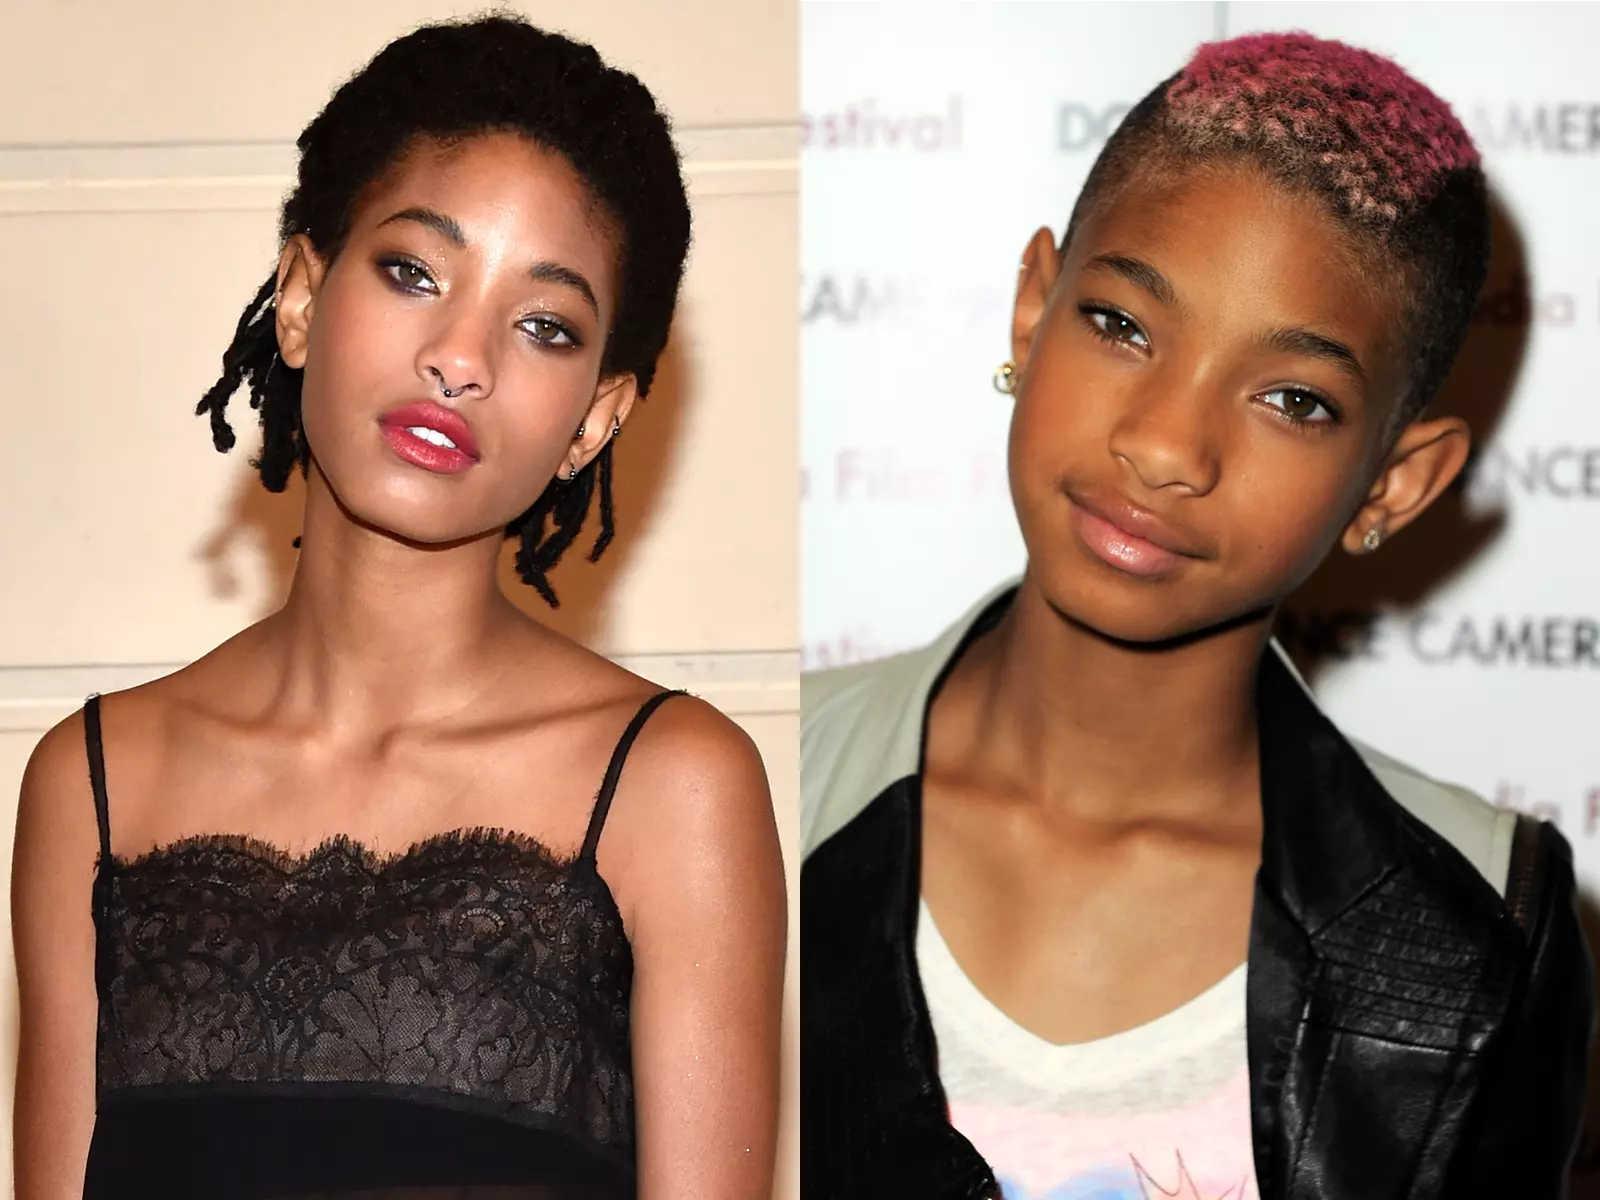 Willow Smith Is Making Braided Sideburns a Thing. No, Really